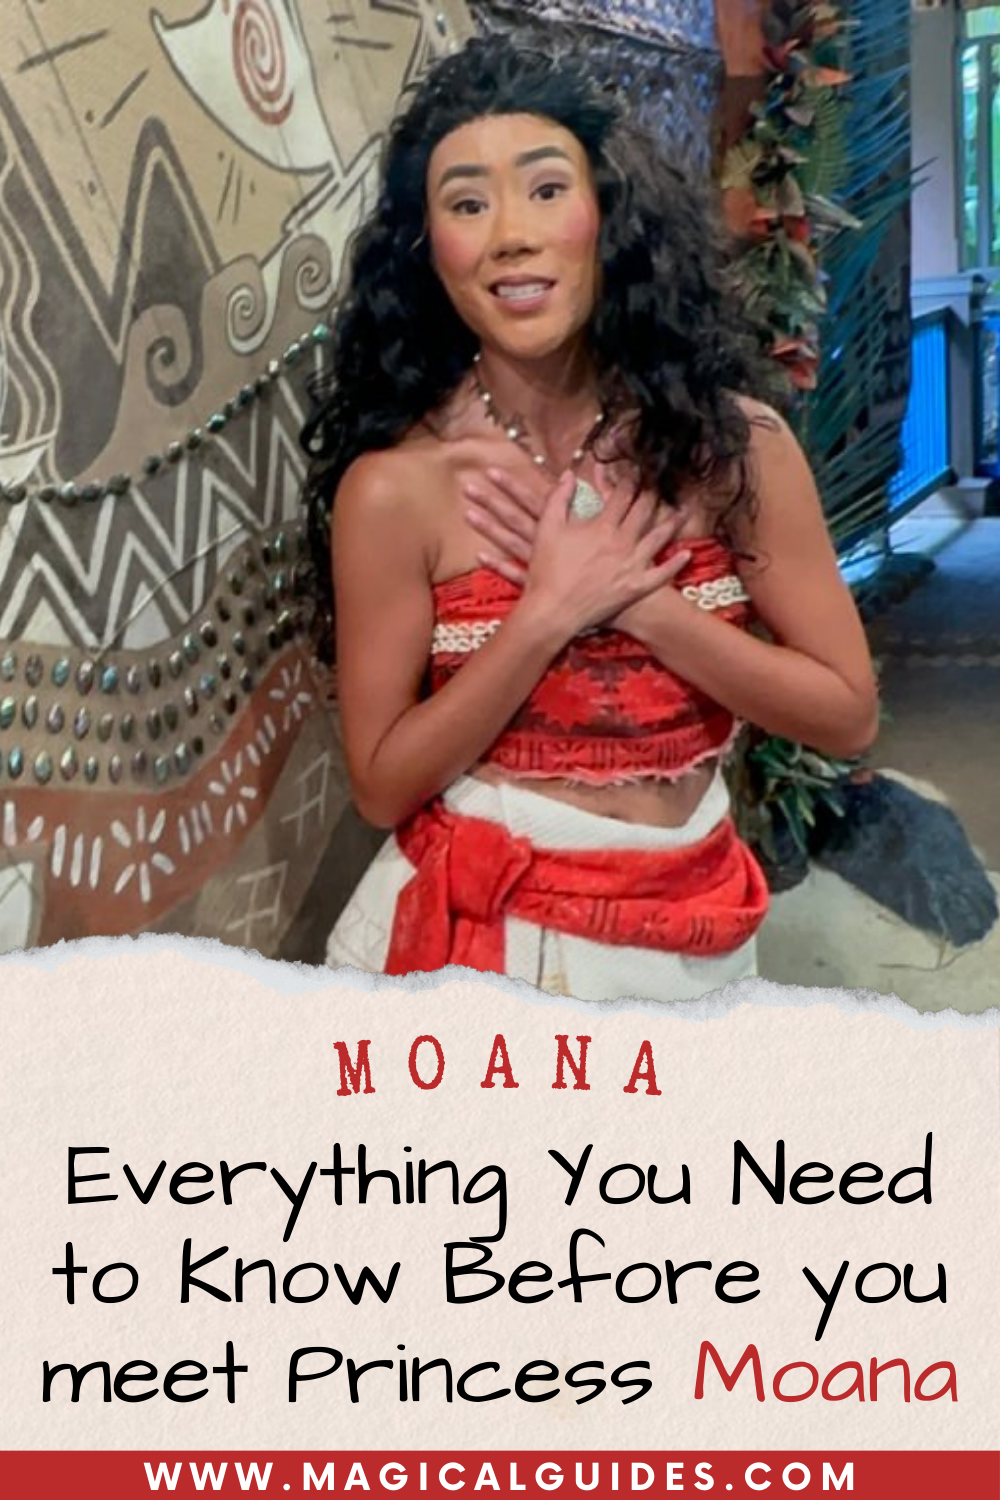 There are many places Moana fans can meet Moana at Disney World. Find where to meet Moana at Disney World, and what to ask her when you get to meet her. A complete guide to meeting Moana at Walt Disney World on your next vacation. Meet Moana at the Character Landing in Animal Kingdom.